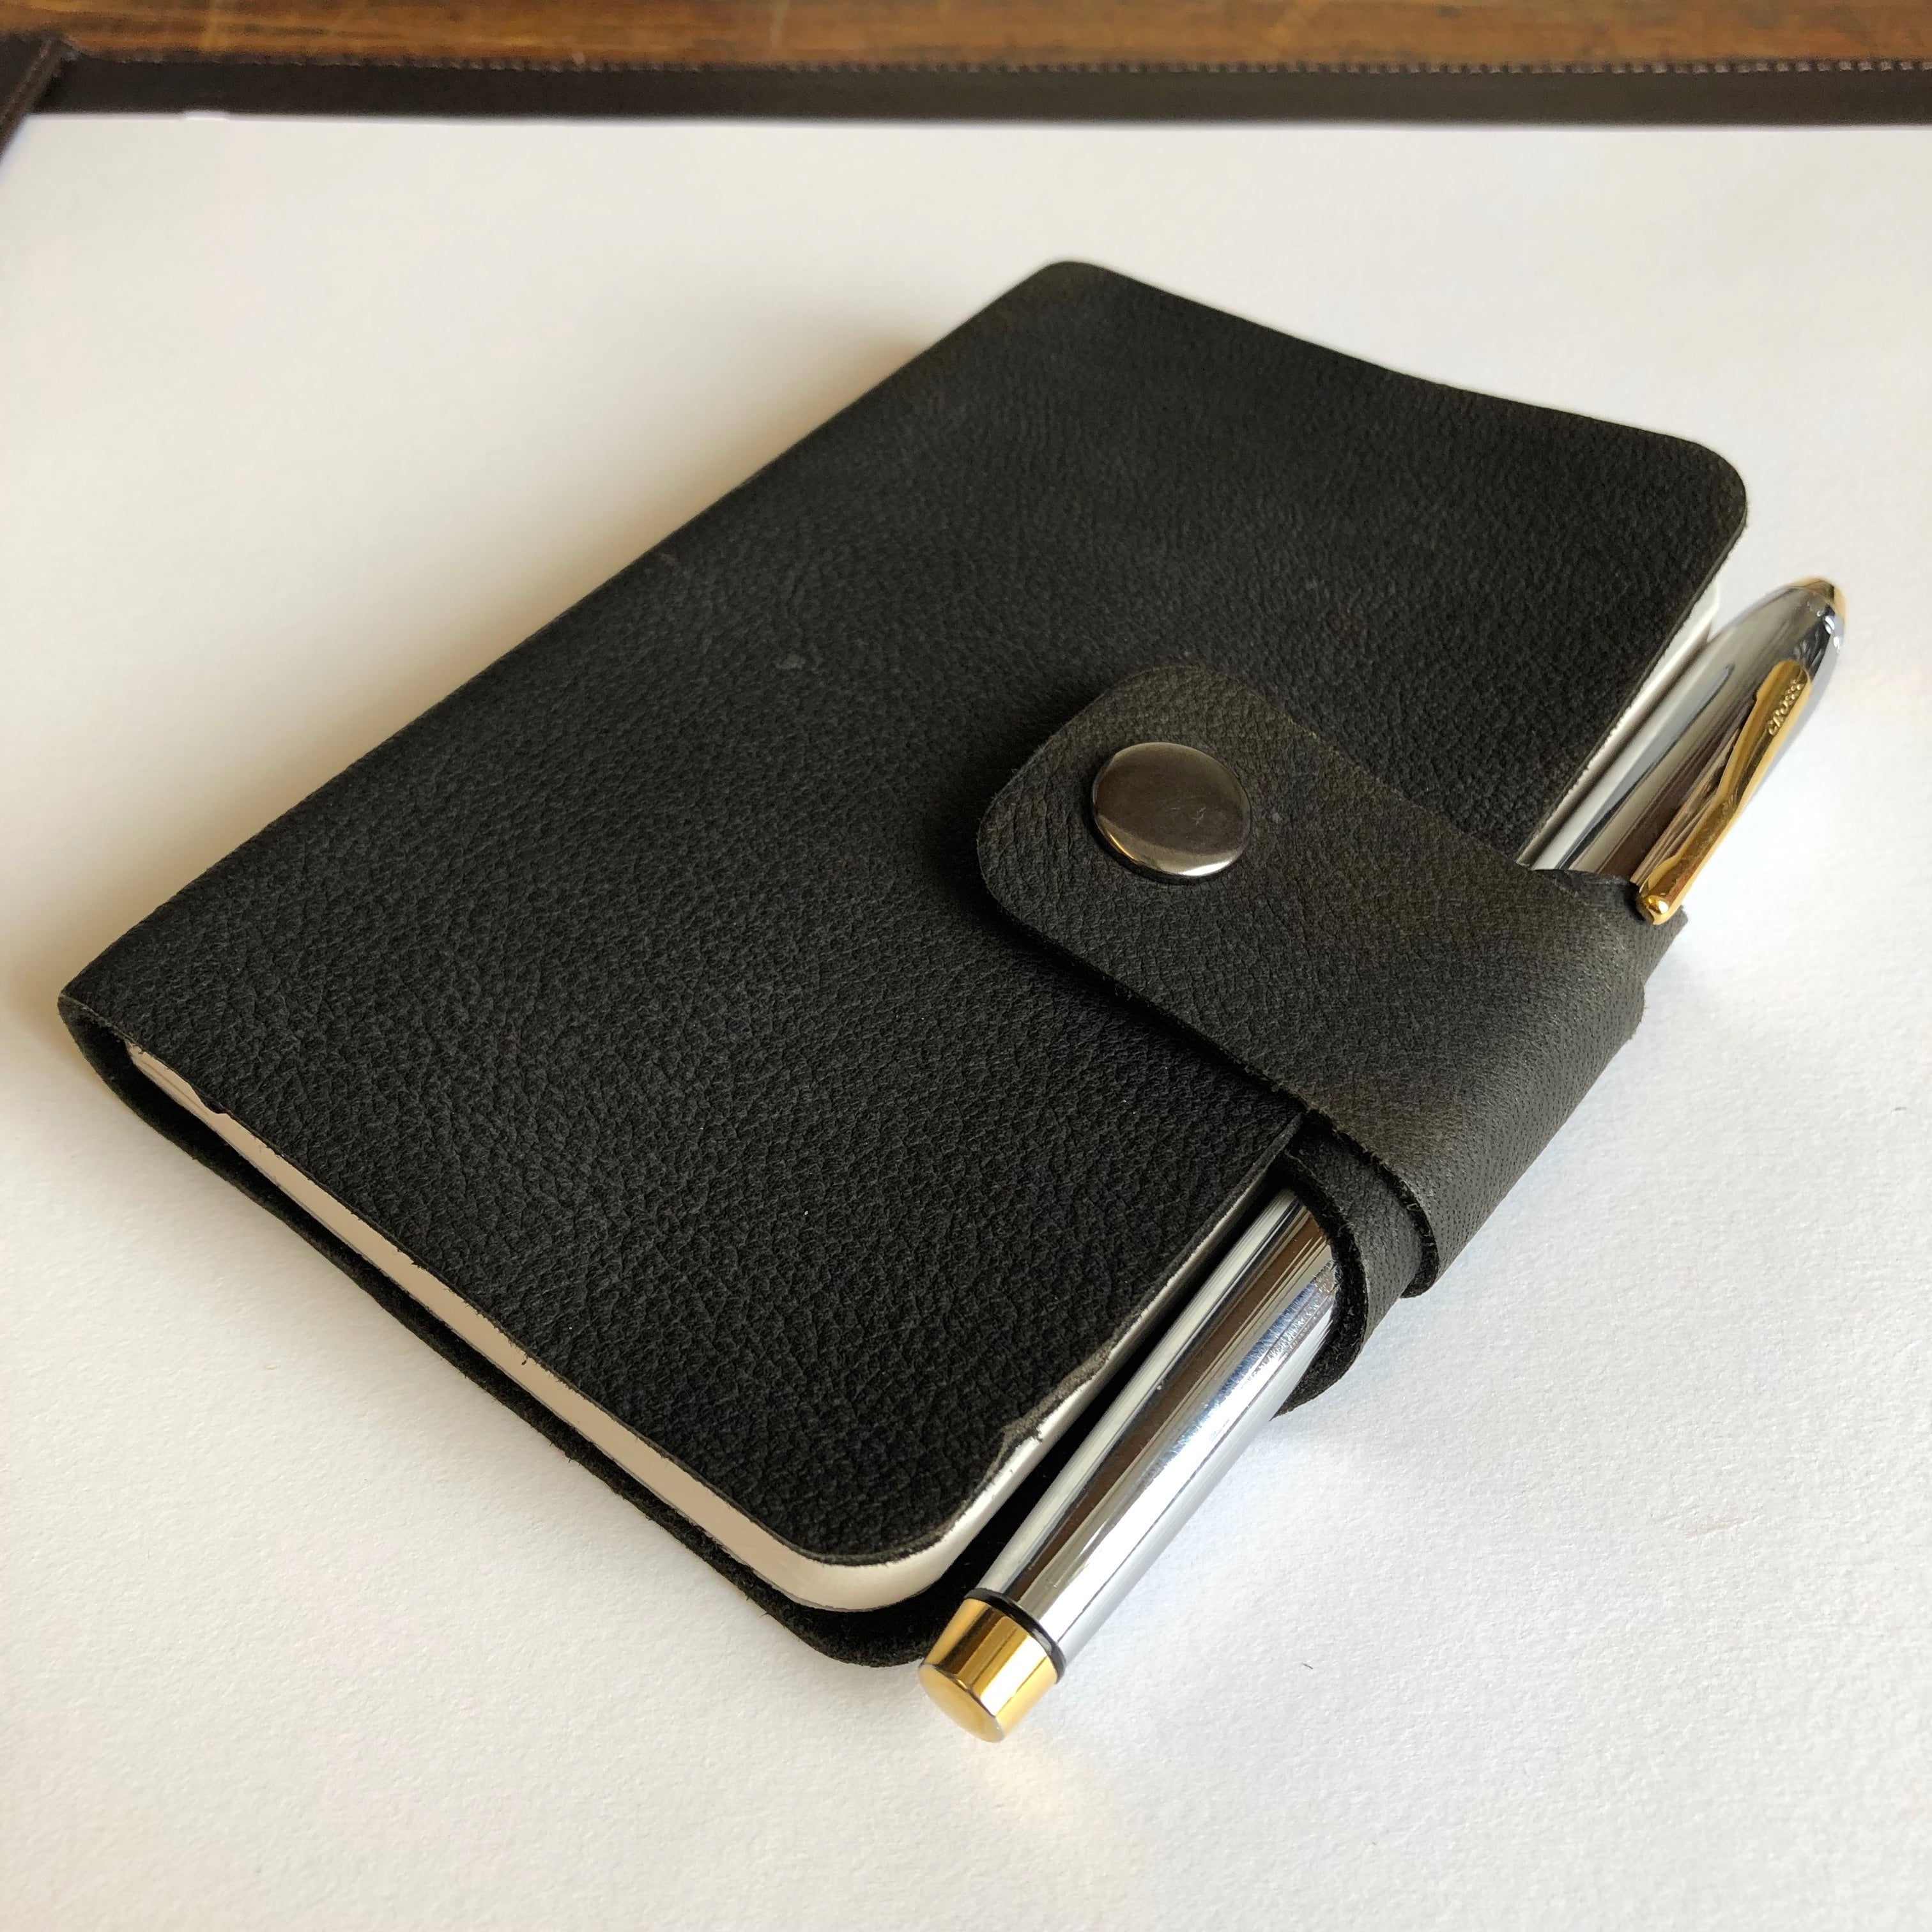 Rutland Luxury Leather Notebook with pen